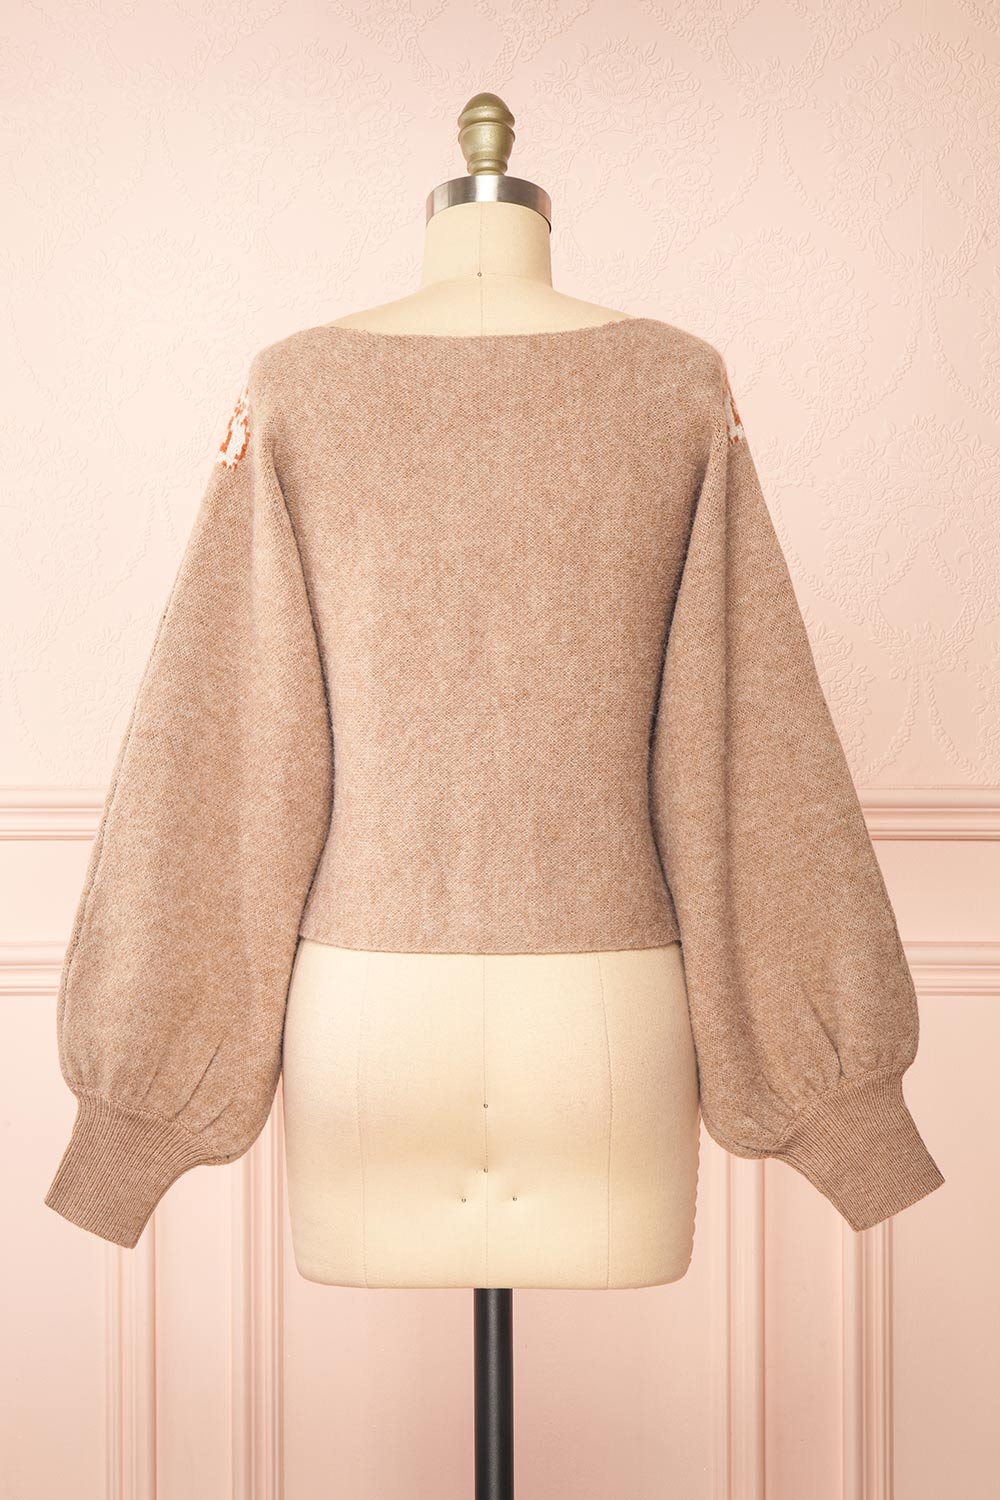 Hargeisa Taupe Knit Sweater w/ Boat Neckline | Boutique 1861 back view